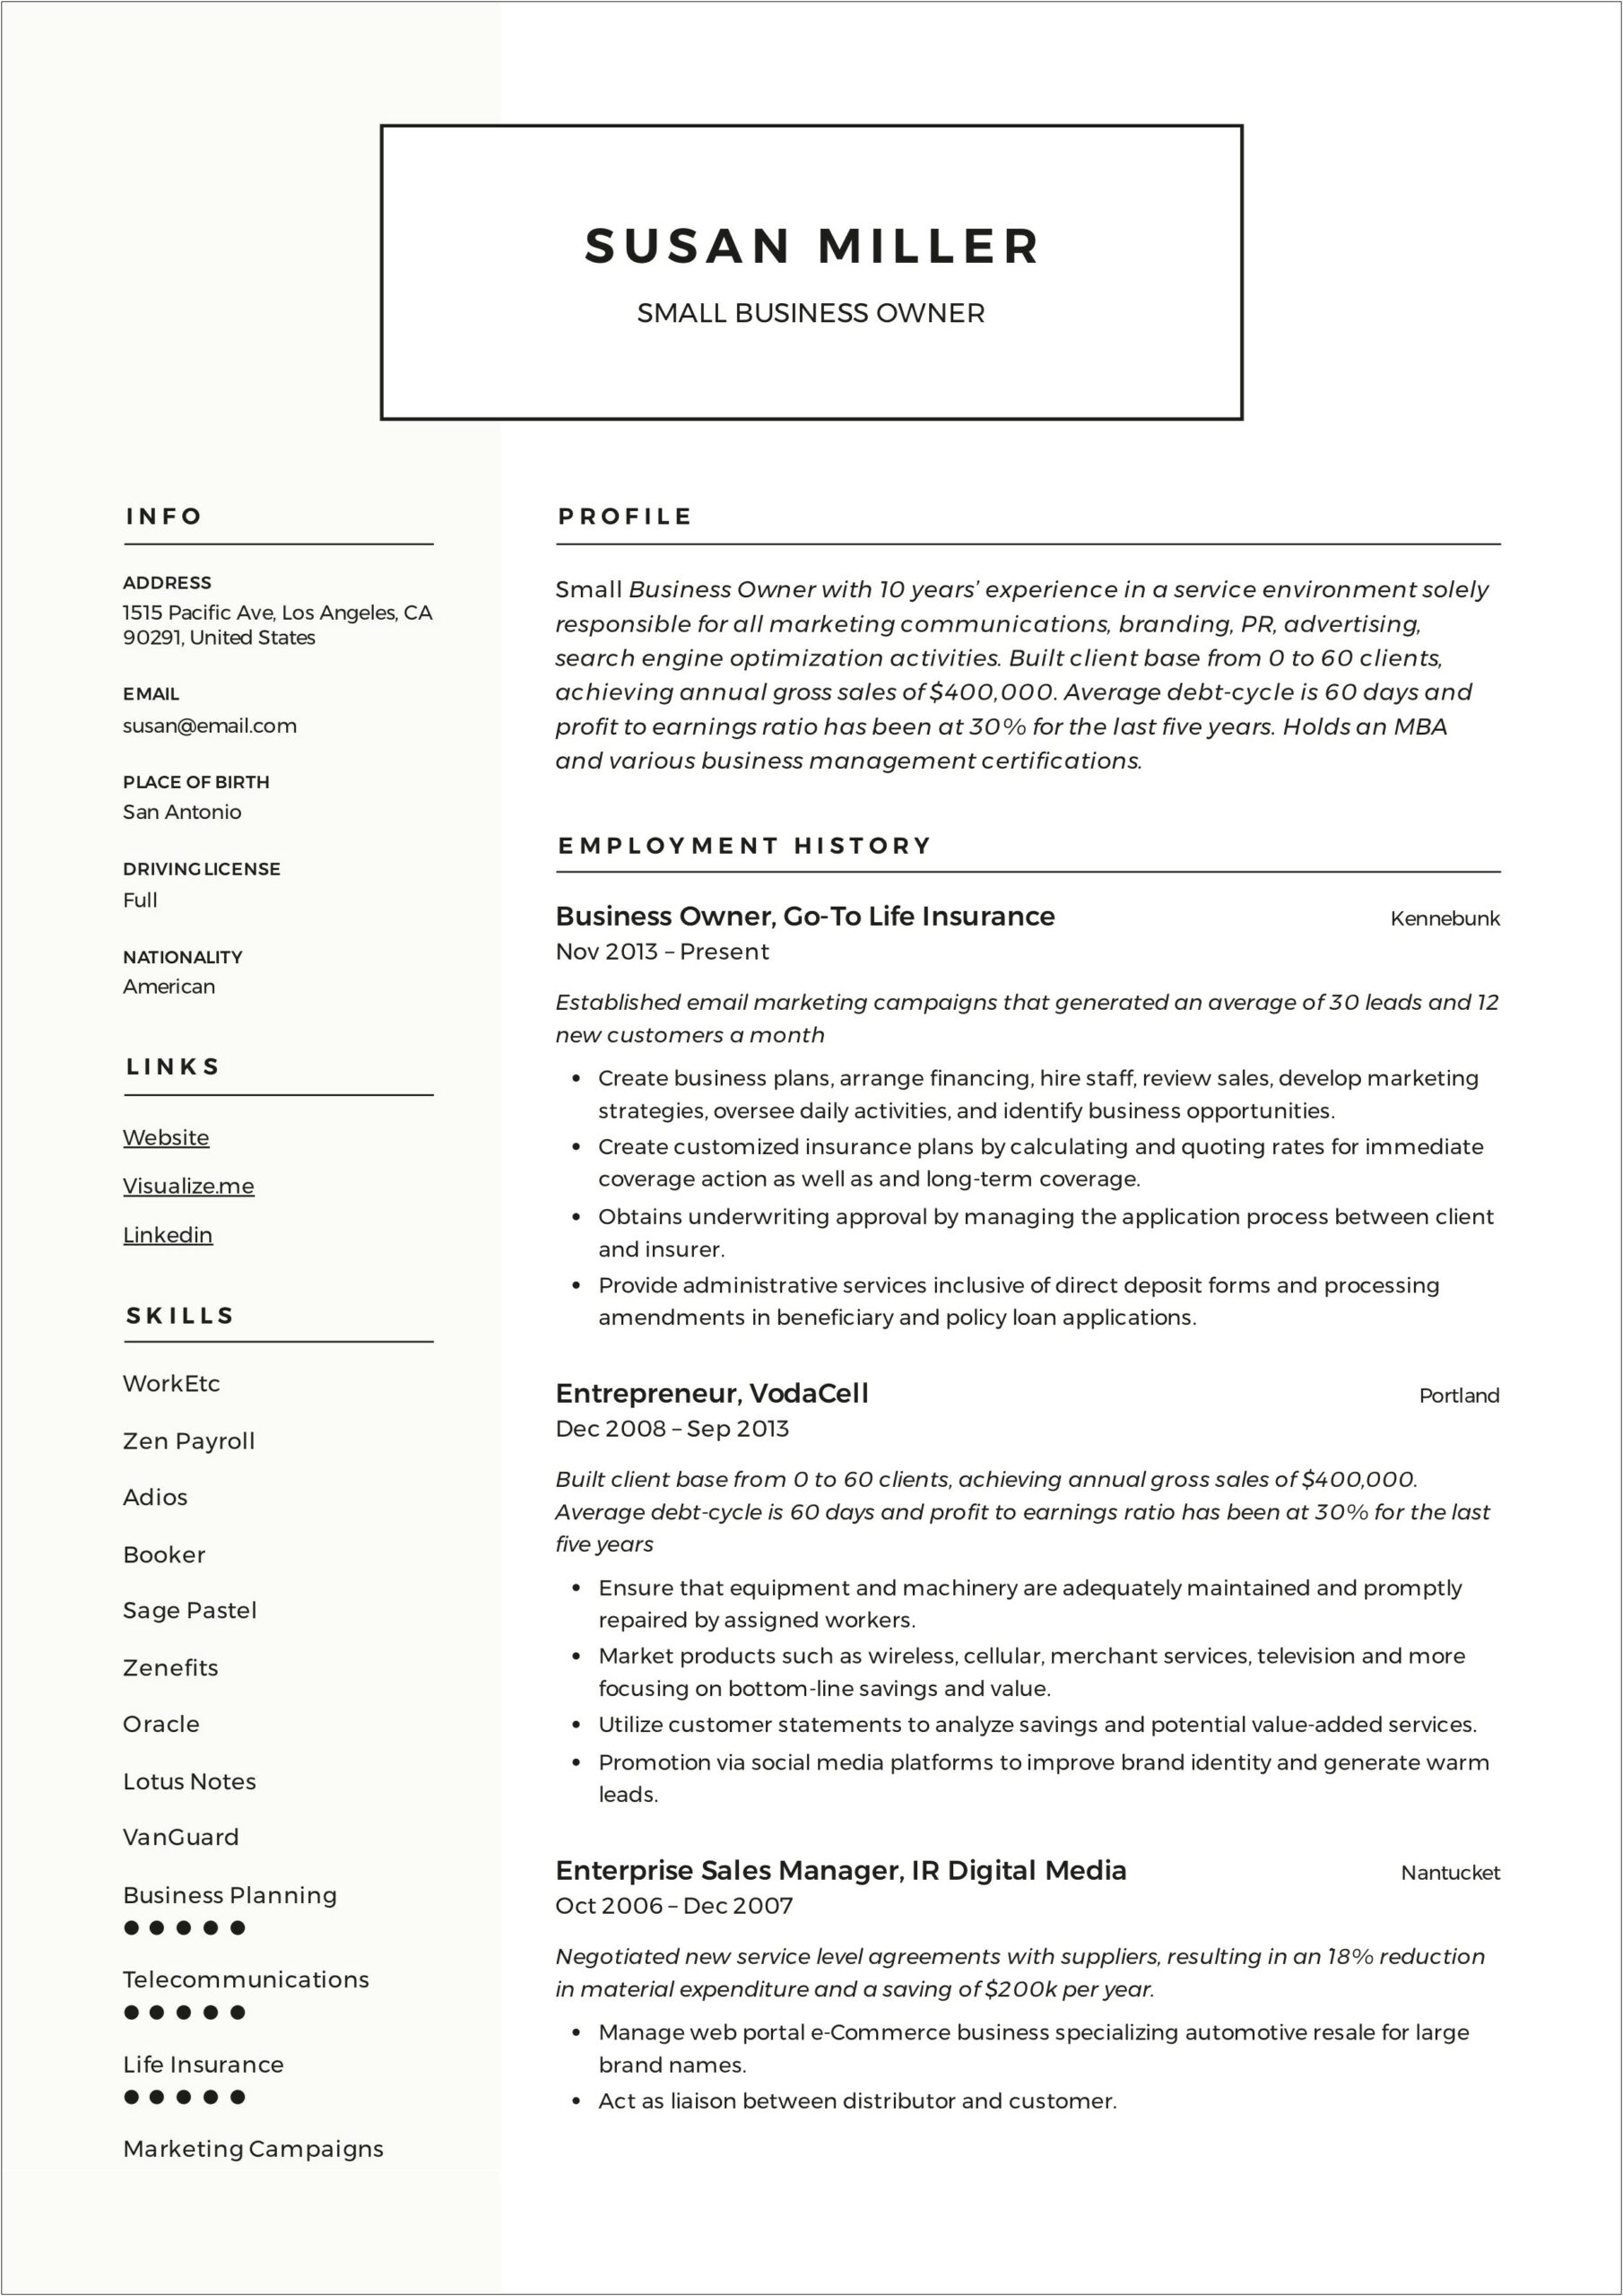 Independent Small Business Owner Job Description For Resume